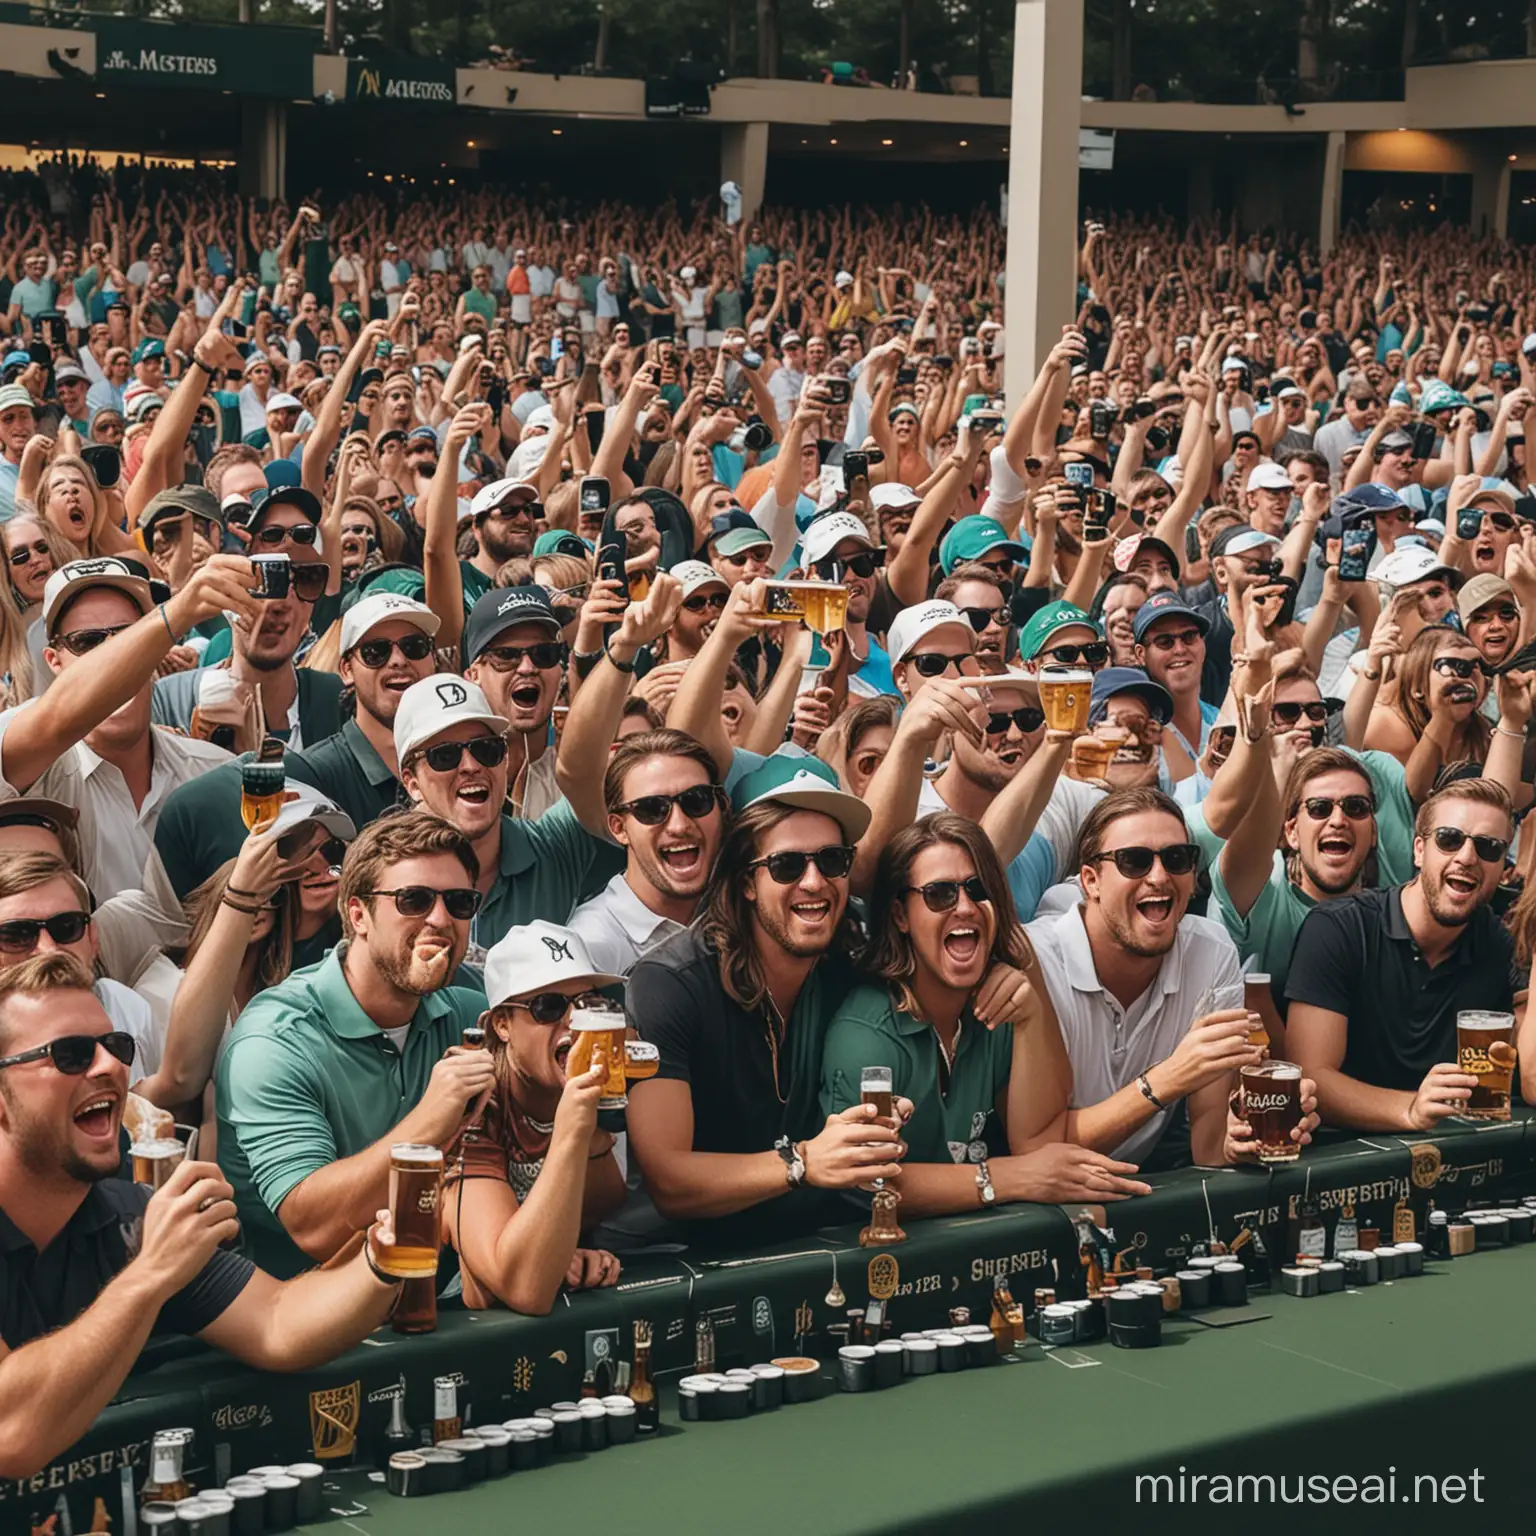 Create a image of the gallery at the Masters Golf Tournament, drinking beer partying, with a dj in the crowd